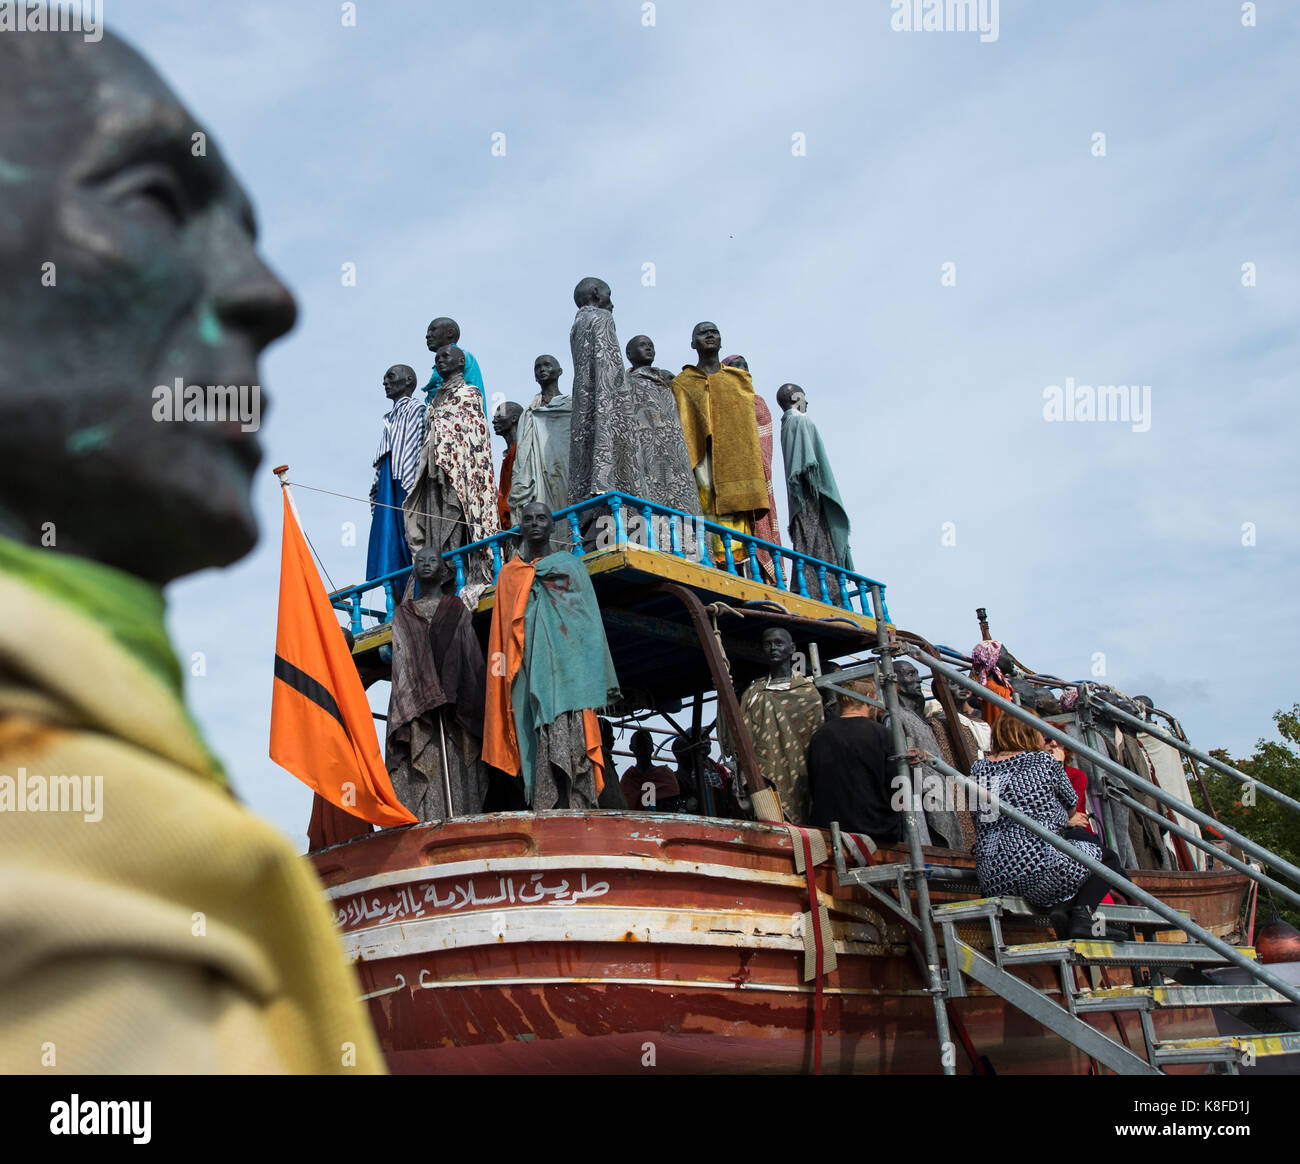 Dresden, Germany. 19th Sep, 2017. Copper figures of the Danish artist Jens Galschiøt can be seen for the project 'Mit Sicherheit gut ankommen' (lit. 'To arrive with security') on board of the former refugee boat 'Al-hadj Djumaa' at the river Elbe in Dresden, Germany, 19 September 2017. The 80 figures are supposed to represent refugees. Credit: Monika Skolimowska/dpa-Zentralbild/dpa/Alamy Live News Stock Photo